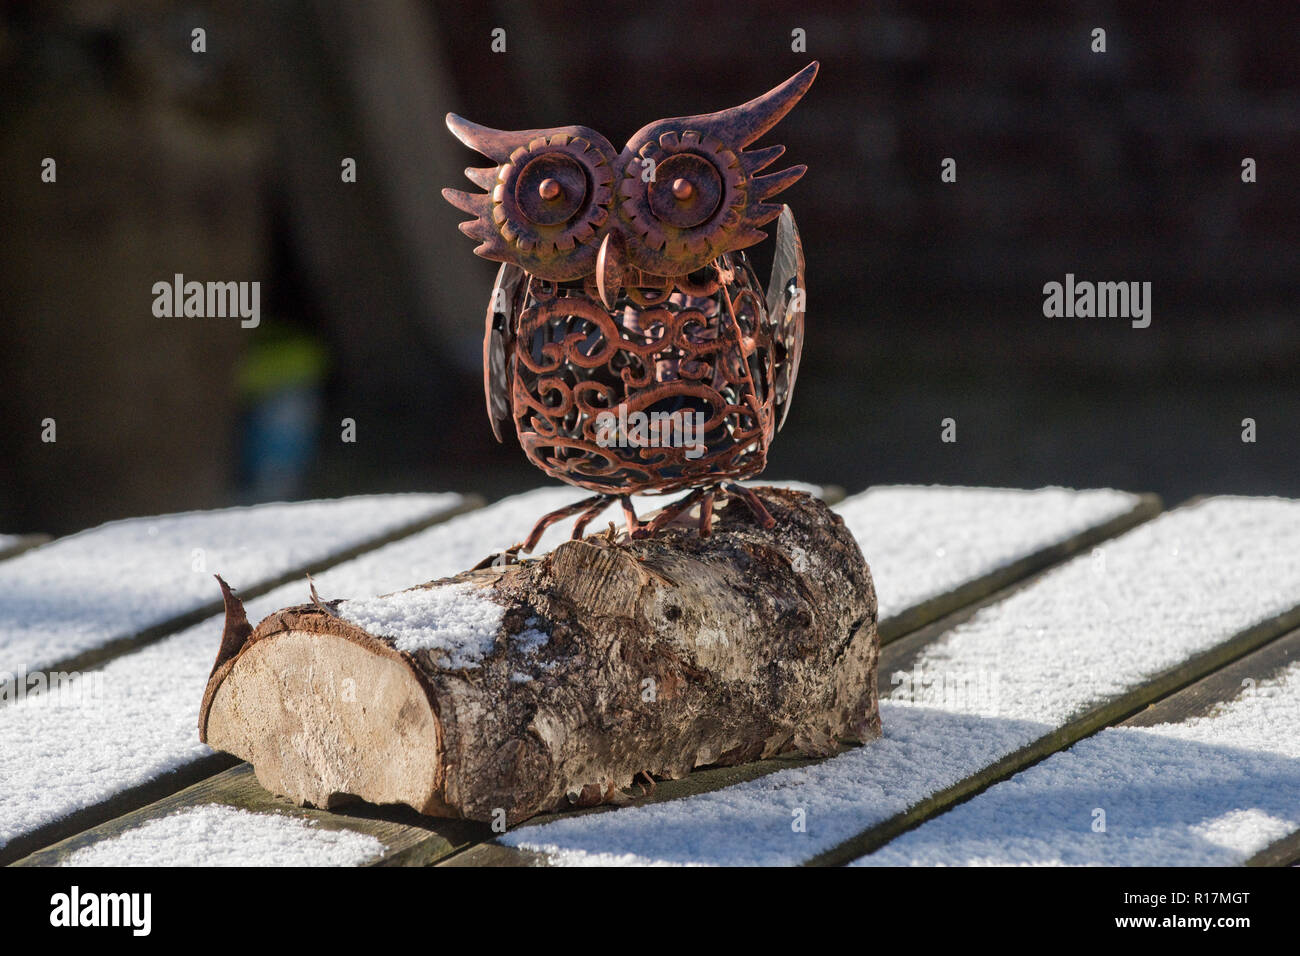 Garden ornament with solar light in the stylised shape of an owl on a garden table with a light snow cover in winter Stock Photo